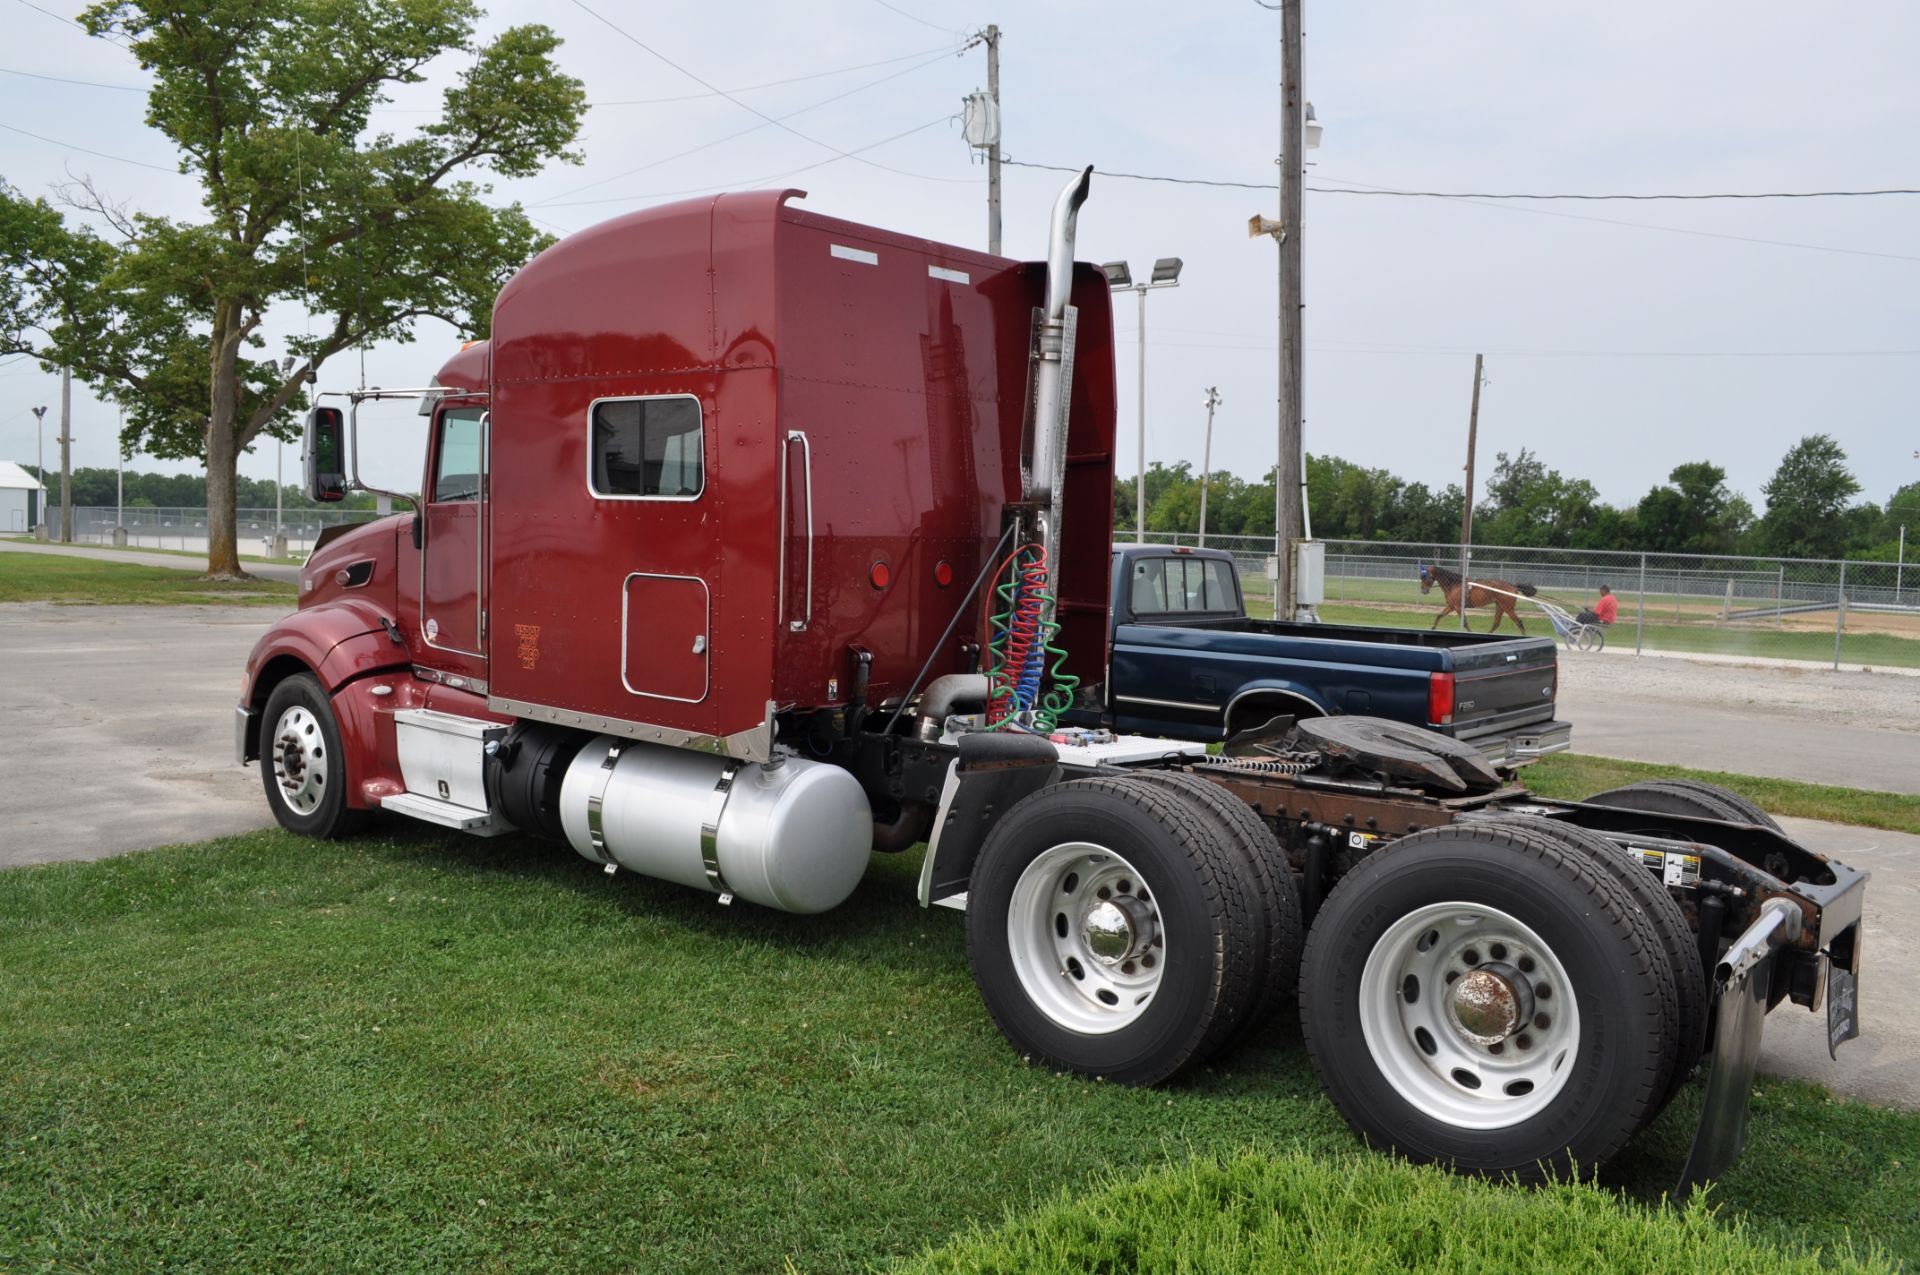 2012 Peterbilt Sleeper Semi Truck, 386 model, chassis weight 17836, Paccar MX 13 motor, - Image 4 of 20